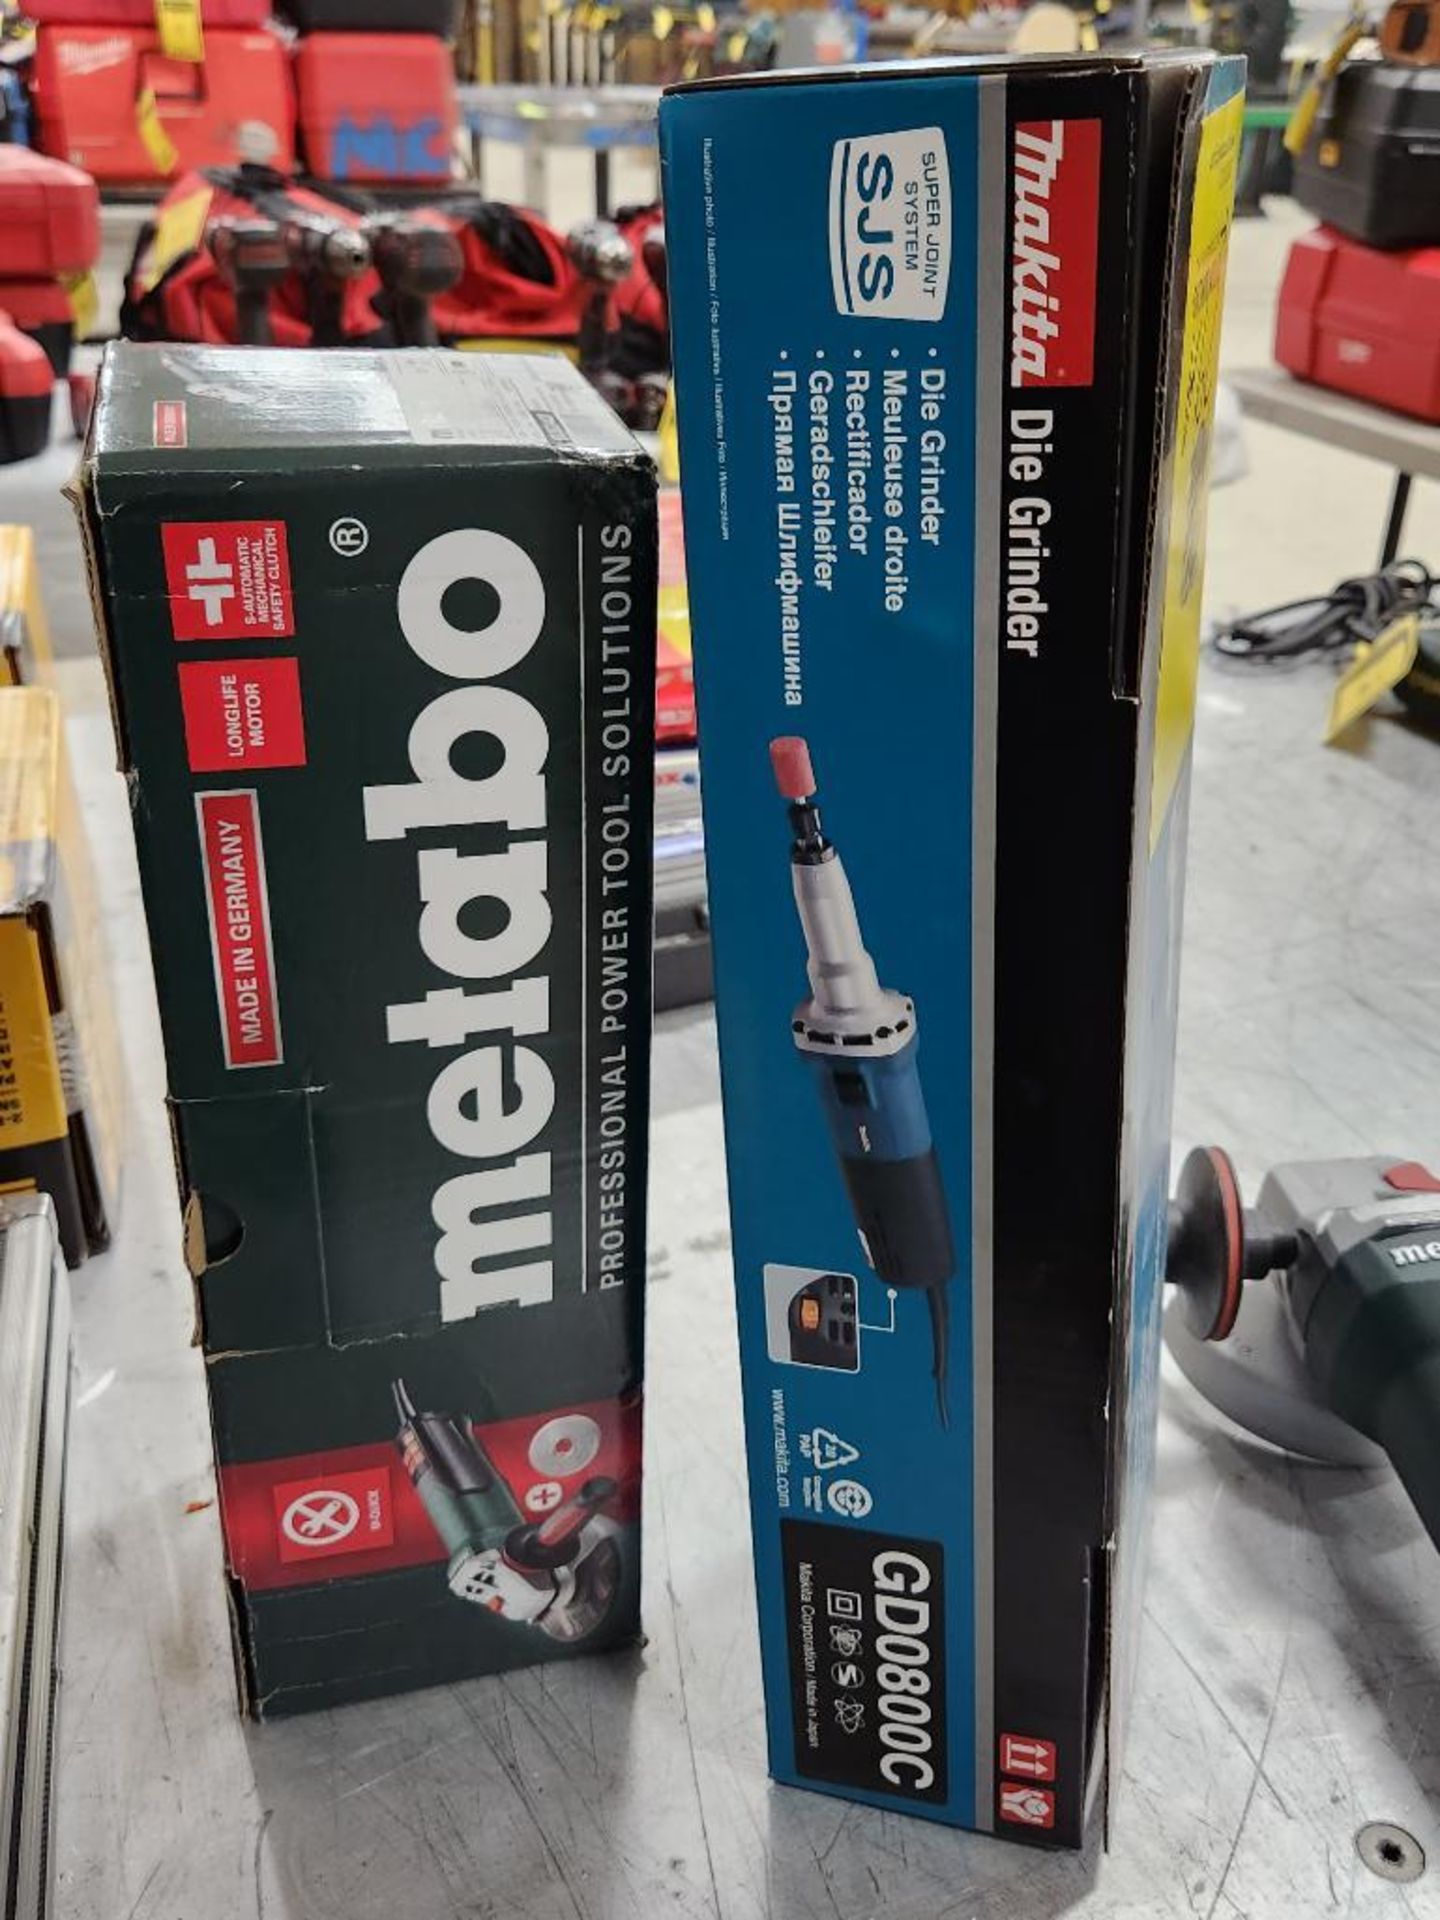 (New) Metabo 4-1/2" Angle Grinder, WP11-125 Quick, P/N 03624420, S/N 2040070348